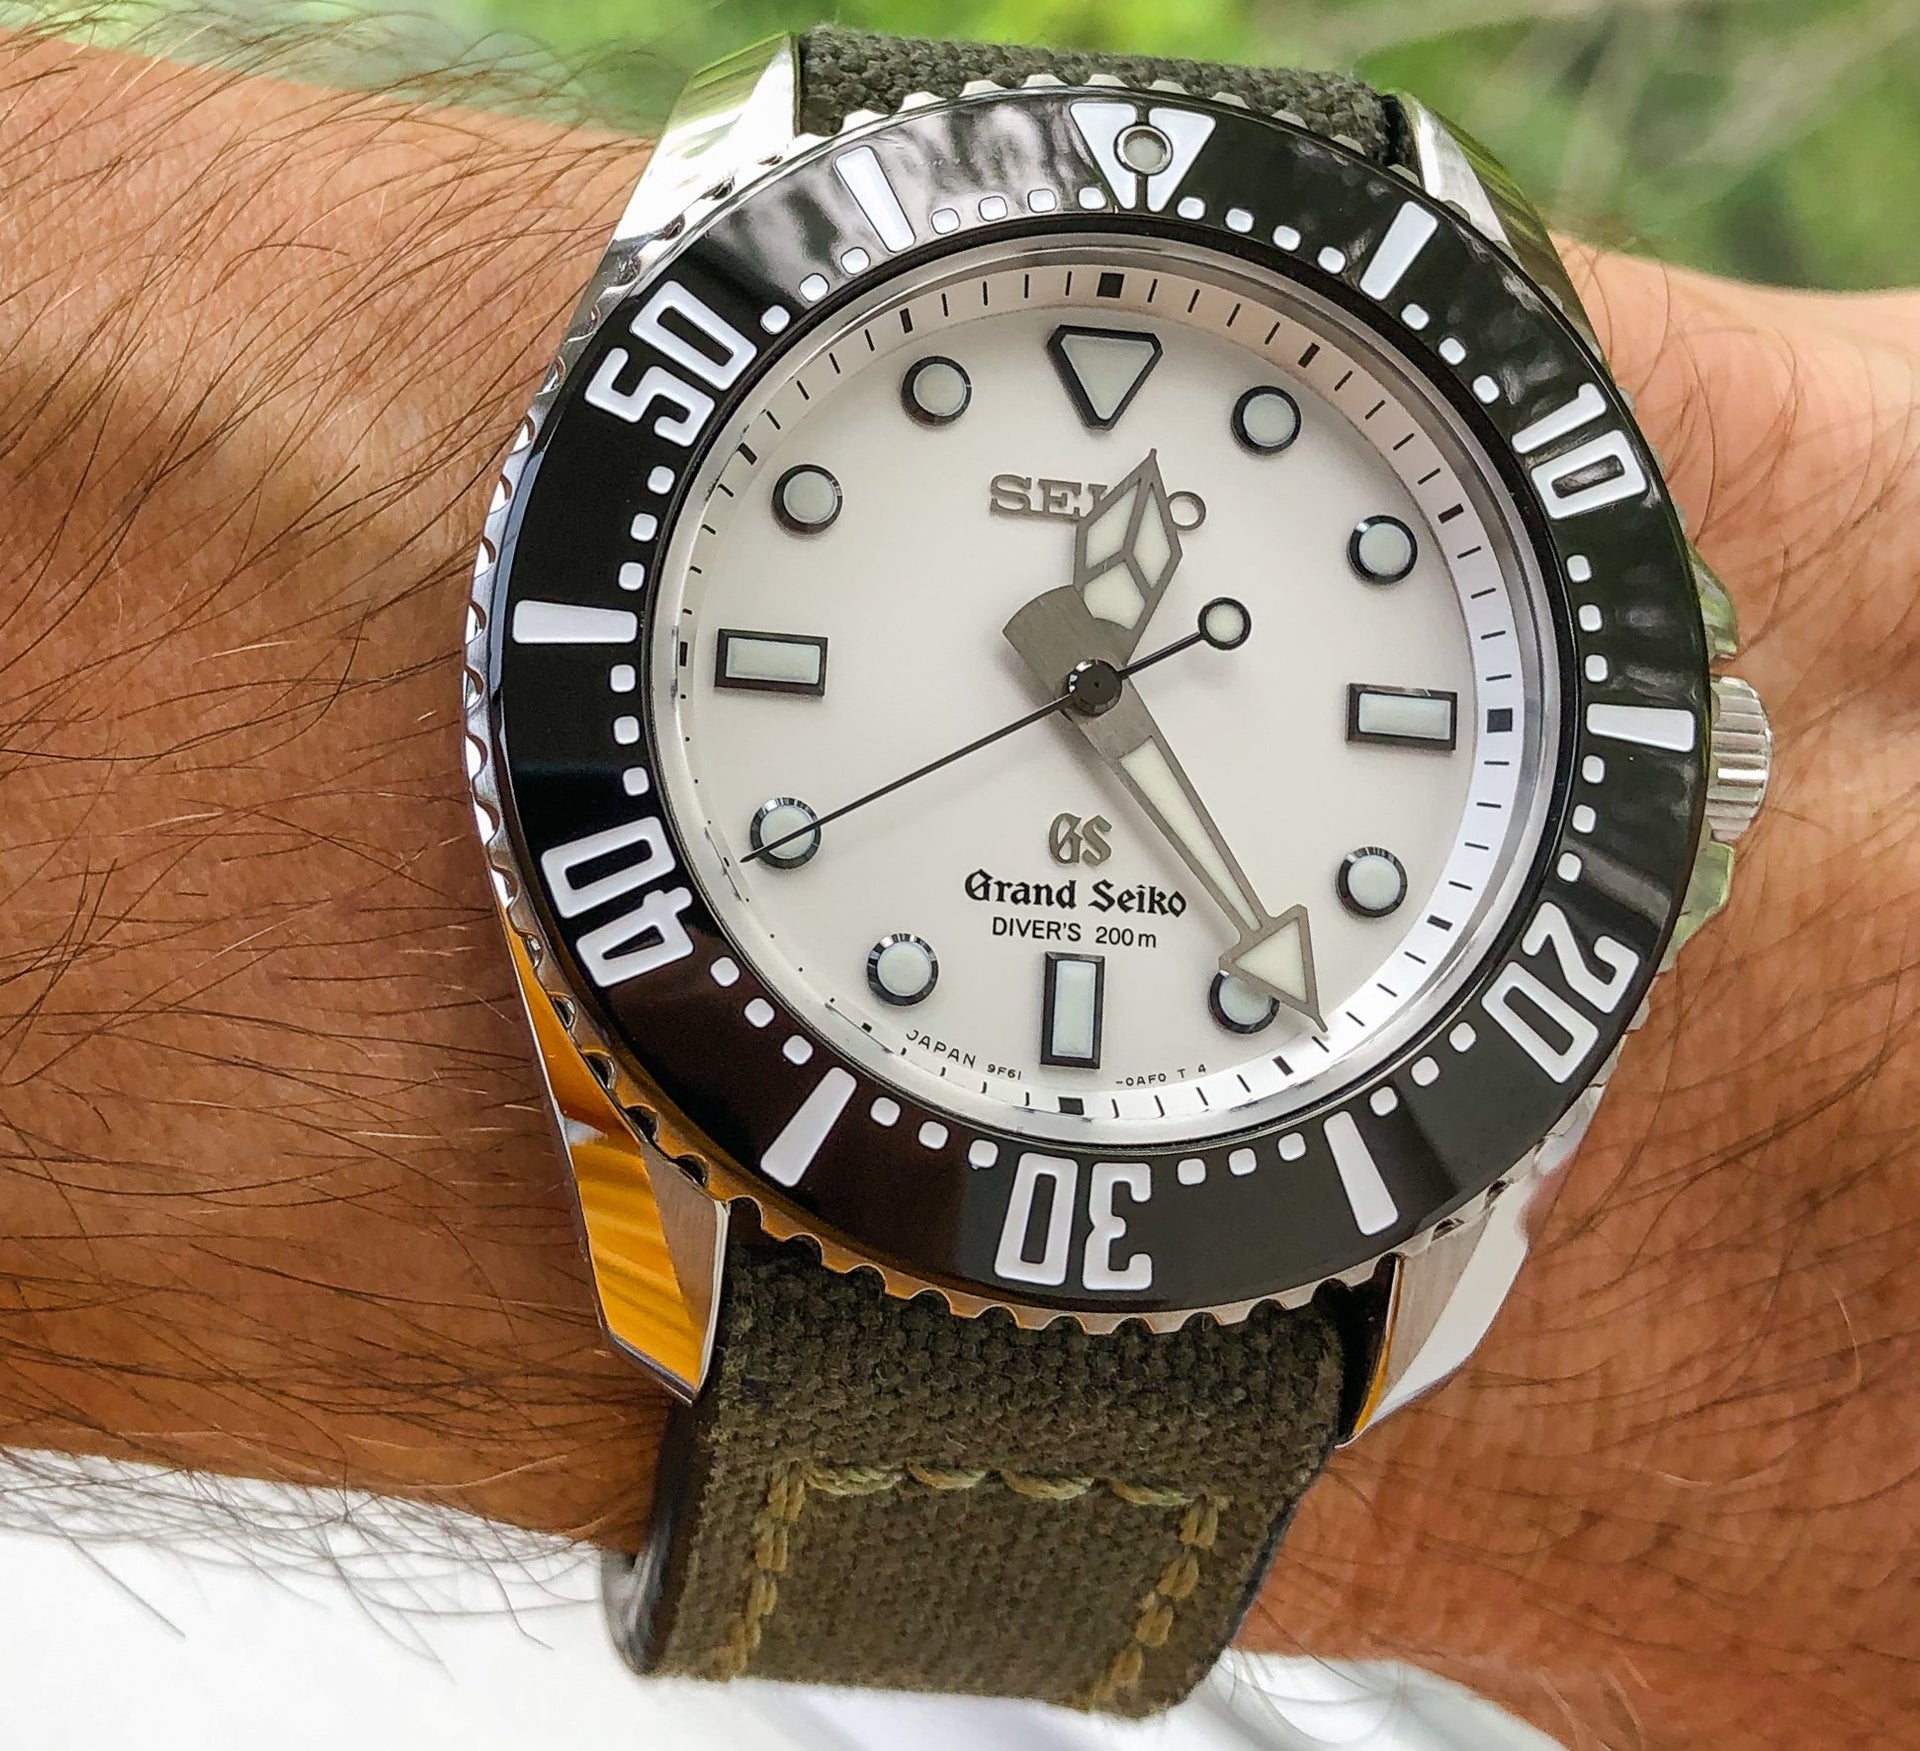 Grand Seiko SBGX115 Diver (white dial) [SOLD] | WatchUSeek Watch Forums